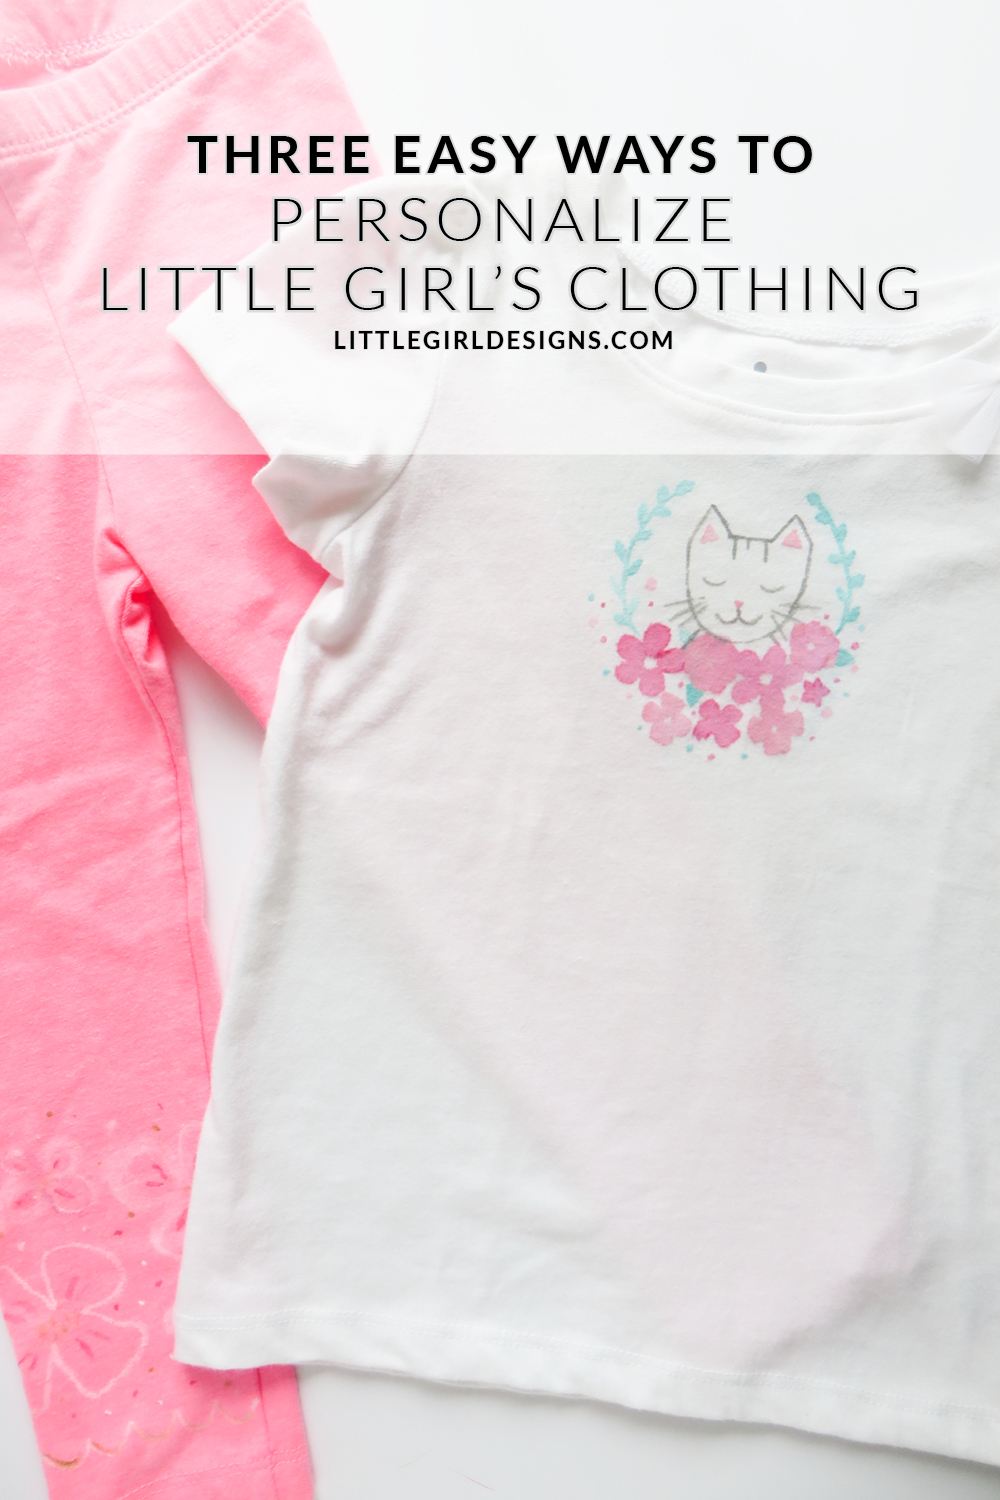 Click to learn three simple ways to personalize your little girl's clothing without having to spend a fortune. These ideas are so fun and easy (and cute!)